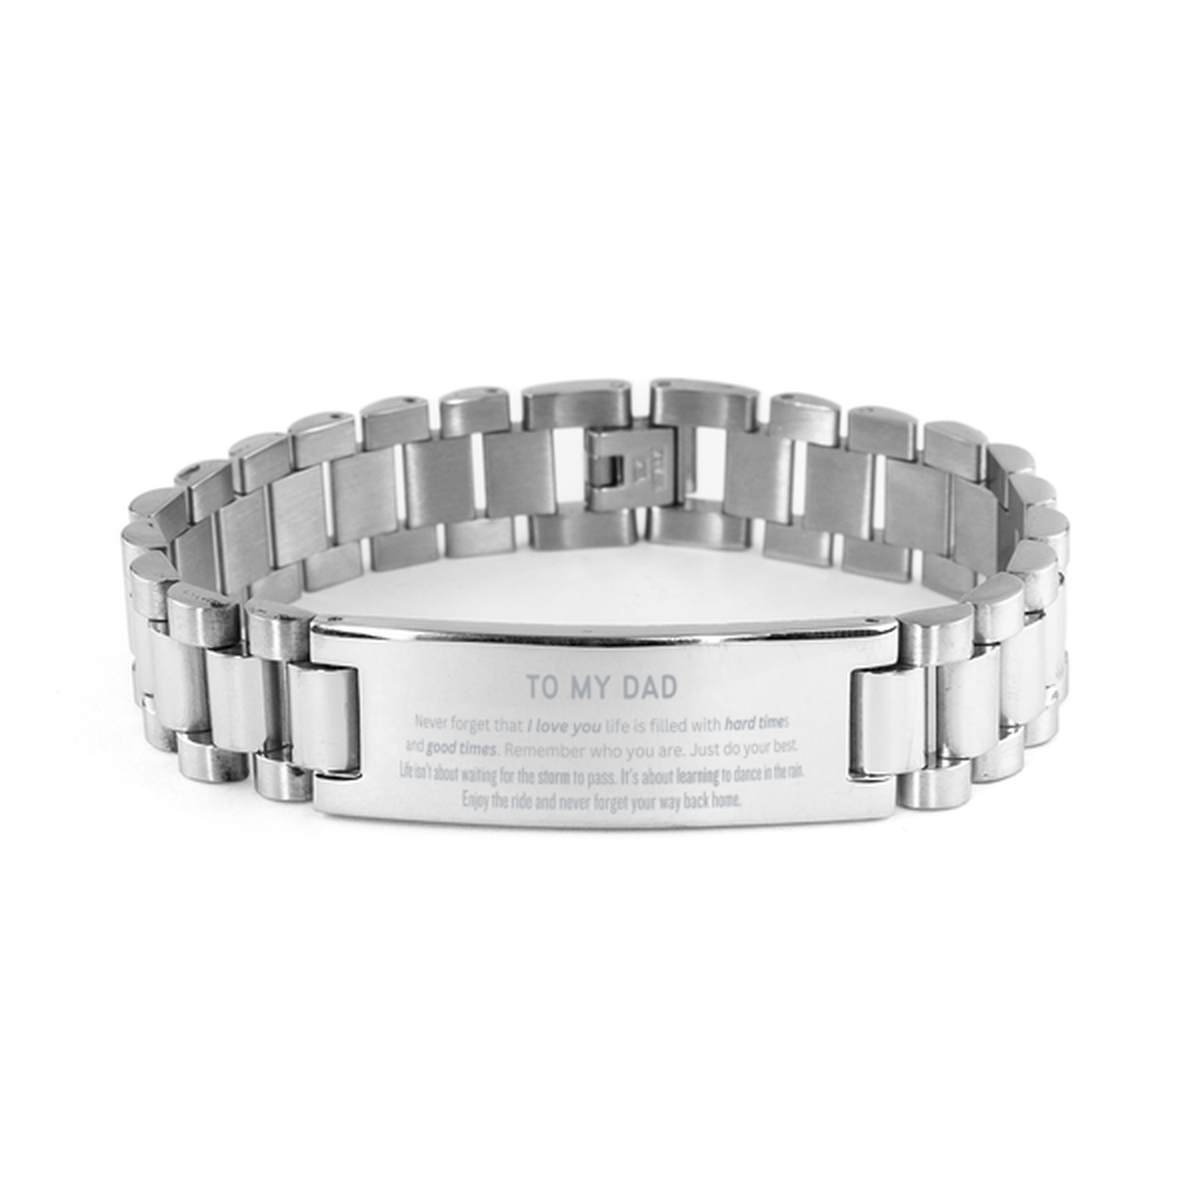 Christmas Dad Ladder Stainless Steel Bracelet Gifts, To My Dad Birthday Thank You Gifts For Dad, Graduation Unique Gifts For Dad To My Dad Never forget that I love you life is filled with hard times and good times. Remember who you are. Just do your best